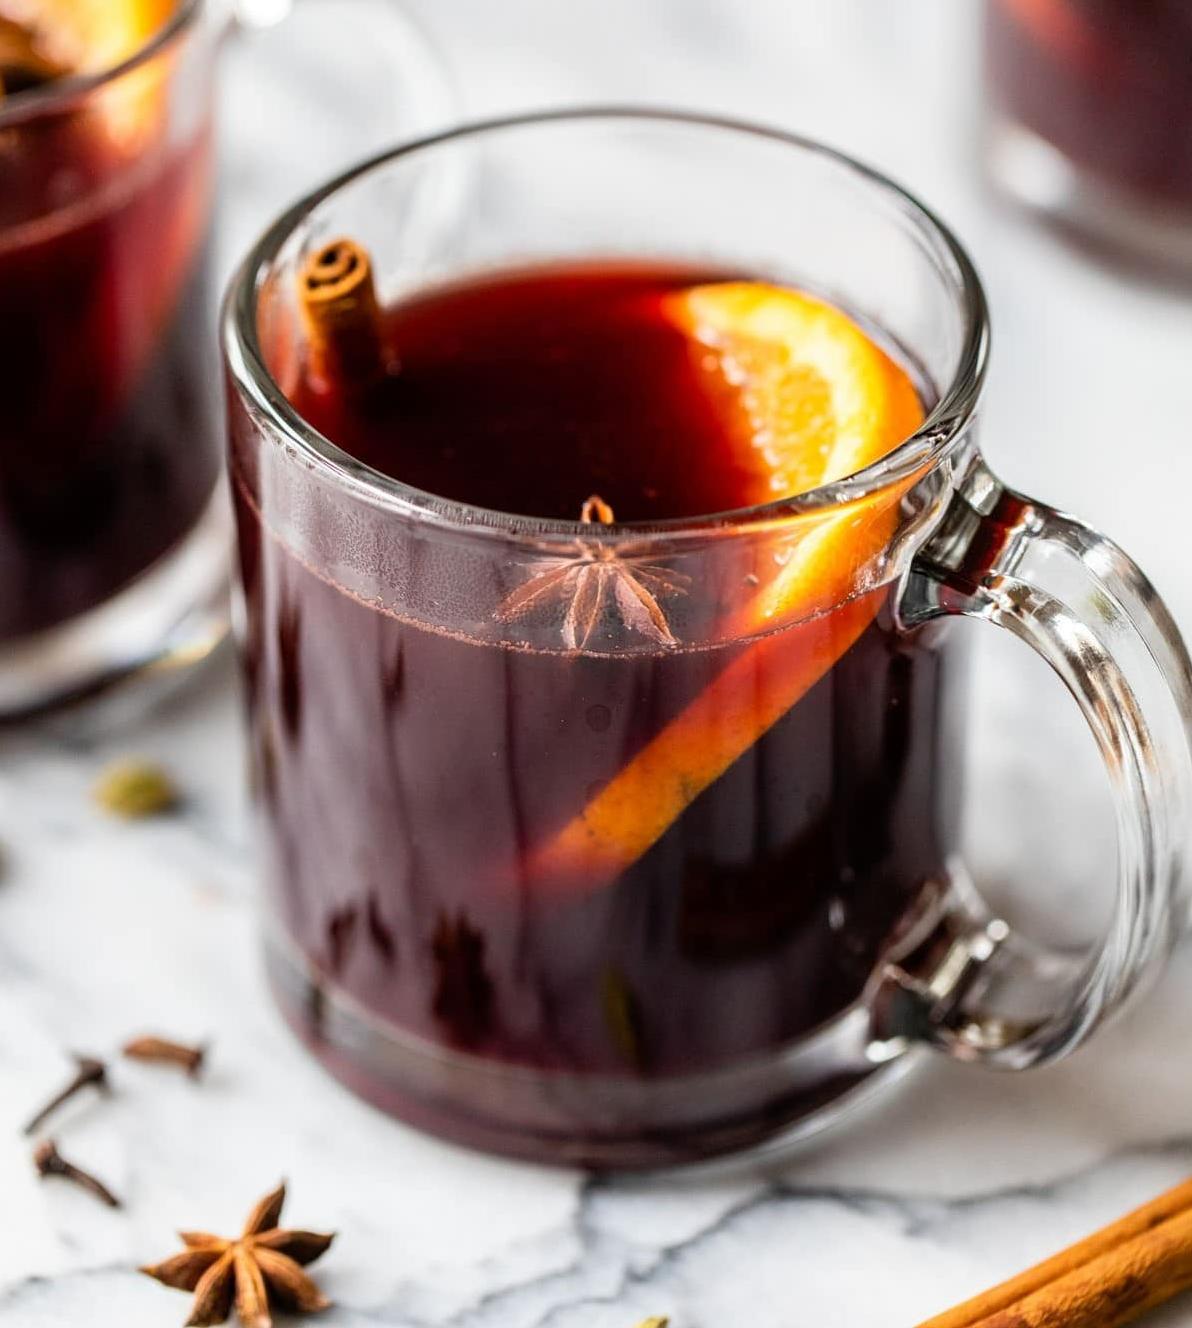  Indulge in the warmth of this spiced wine on a chilly winter day.